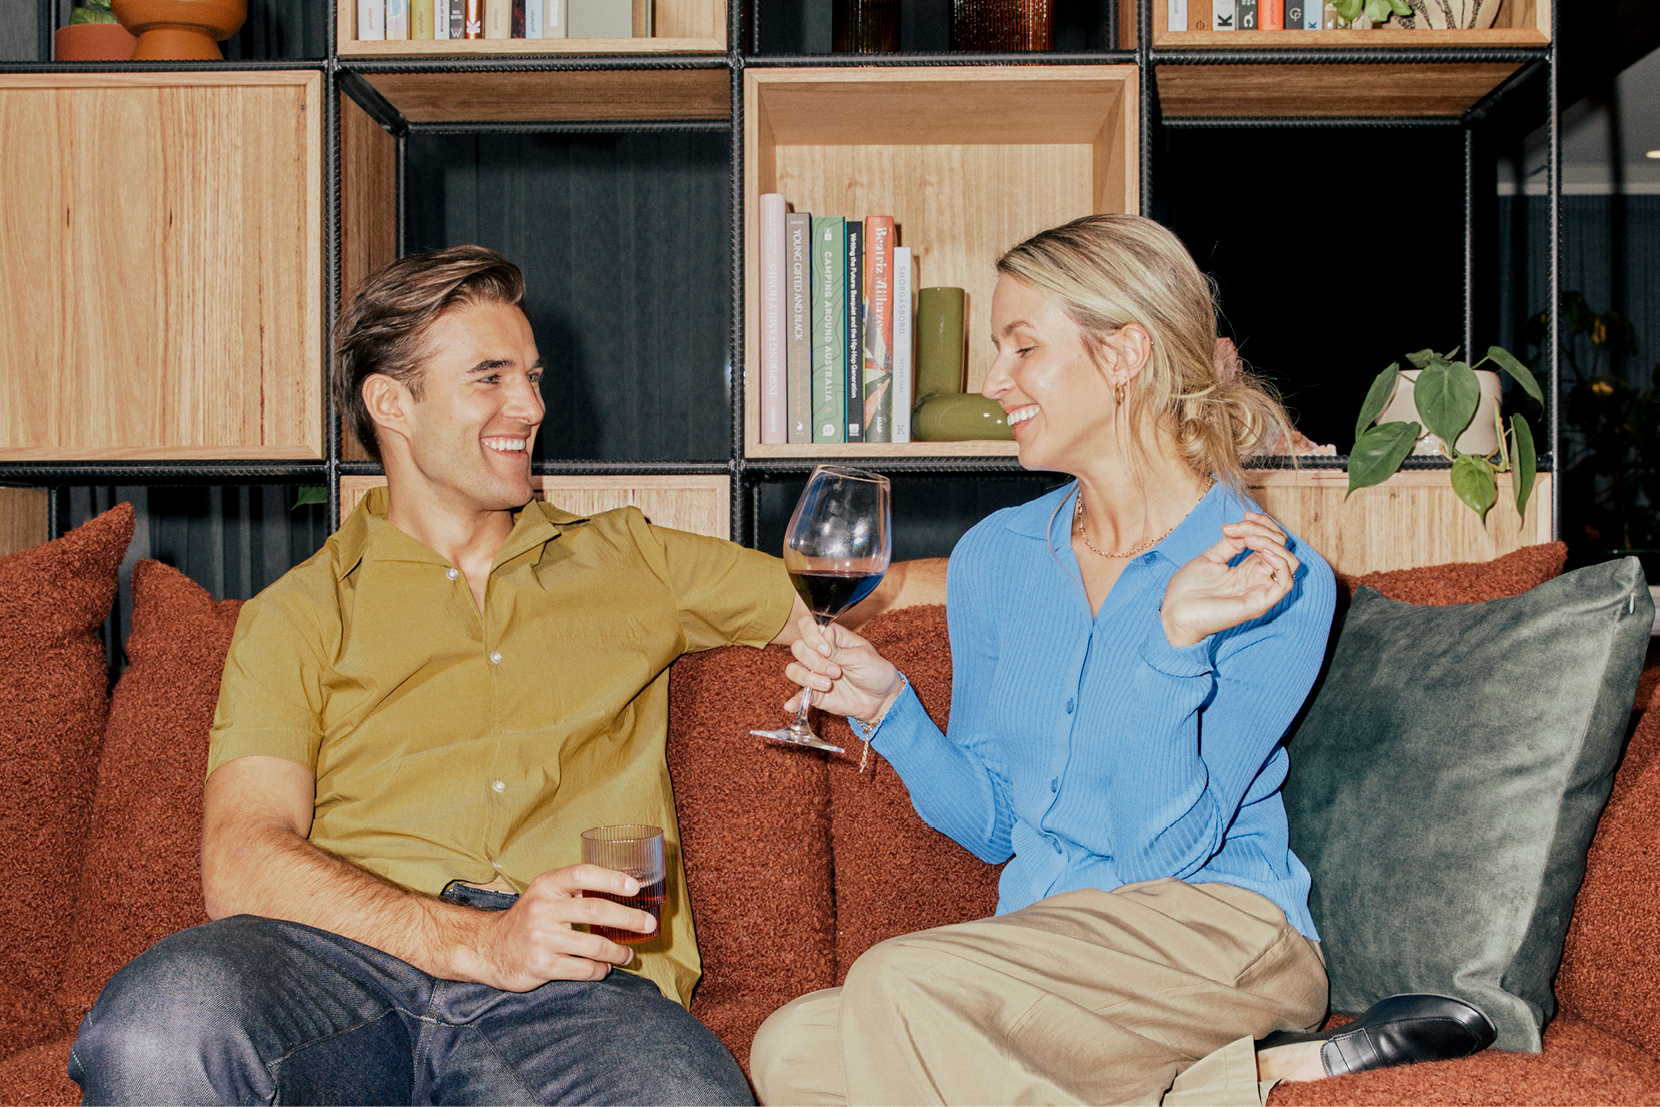 A man and woman sit on a couch laughing with a glass of wine.